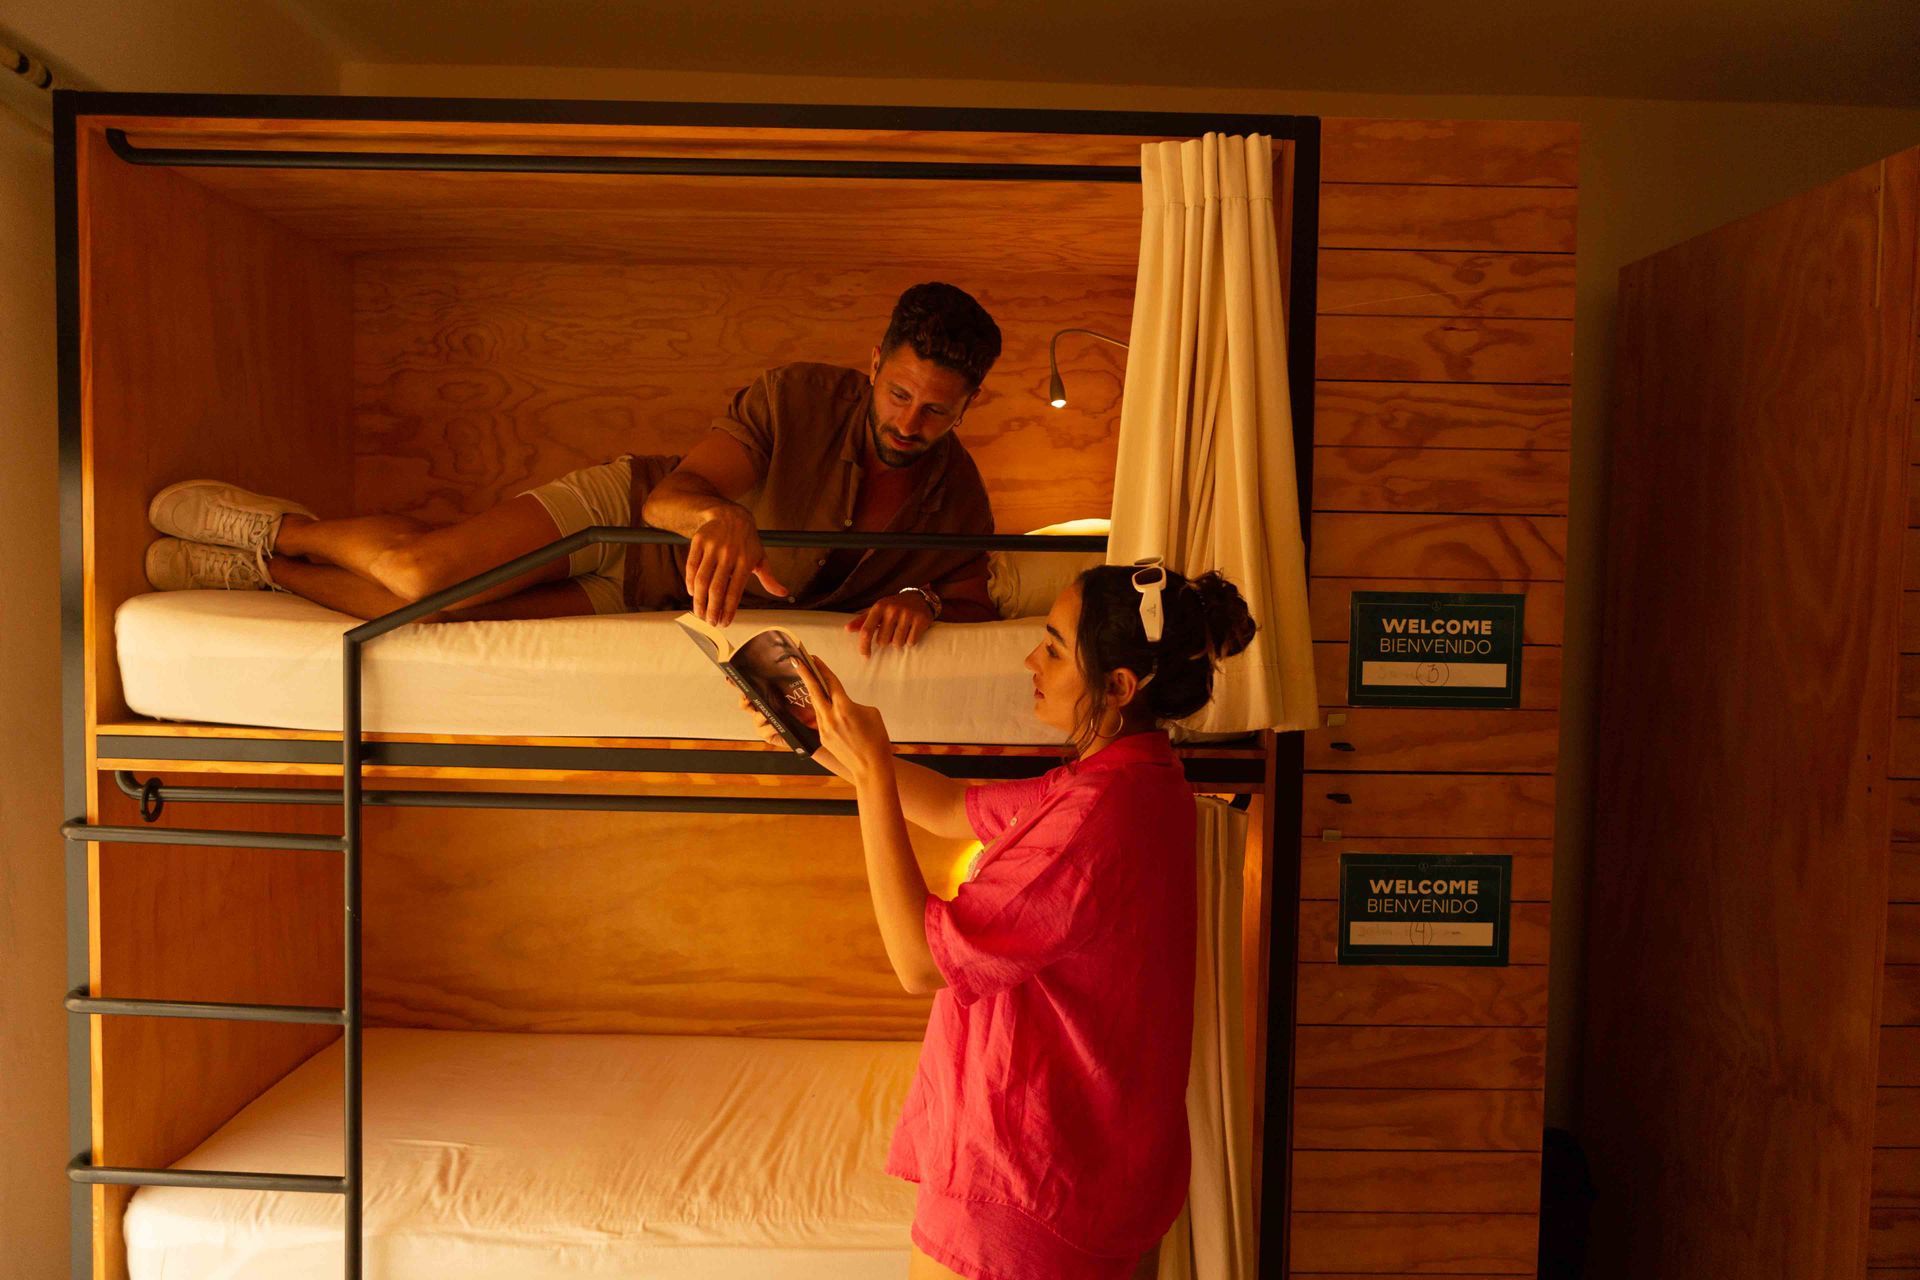 A woman is standing next to a man laying on a bunk bed.